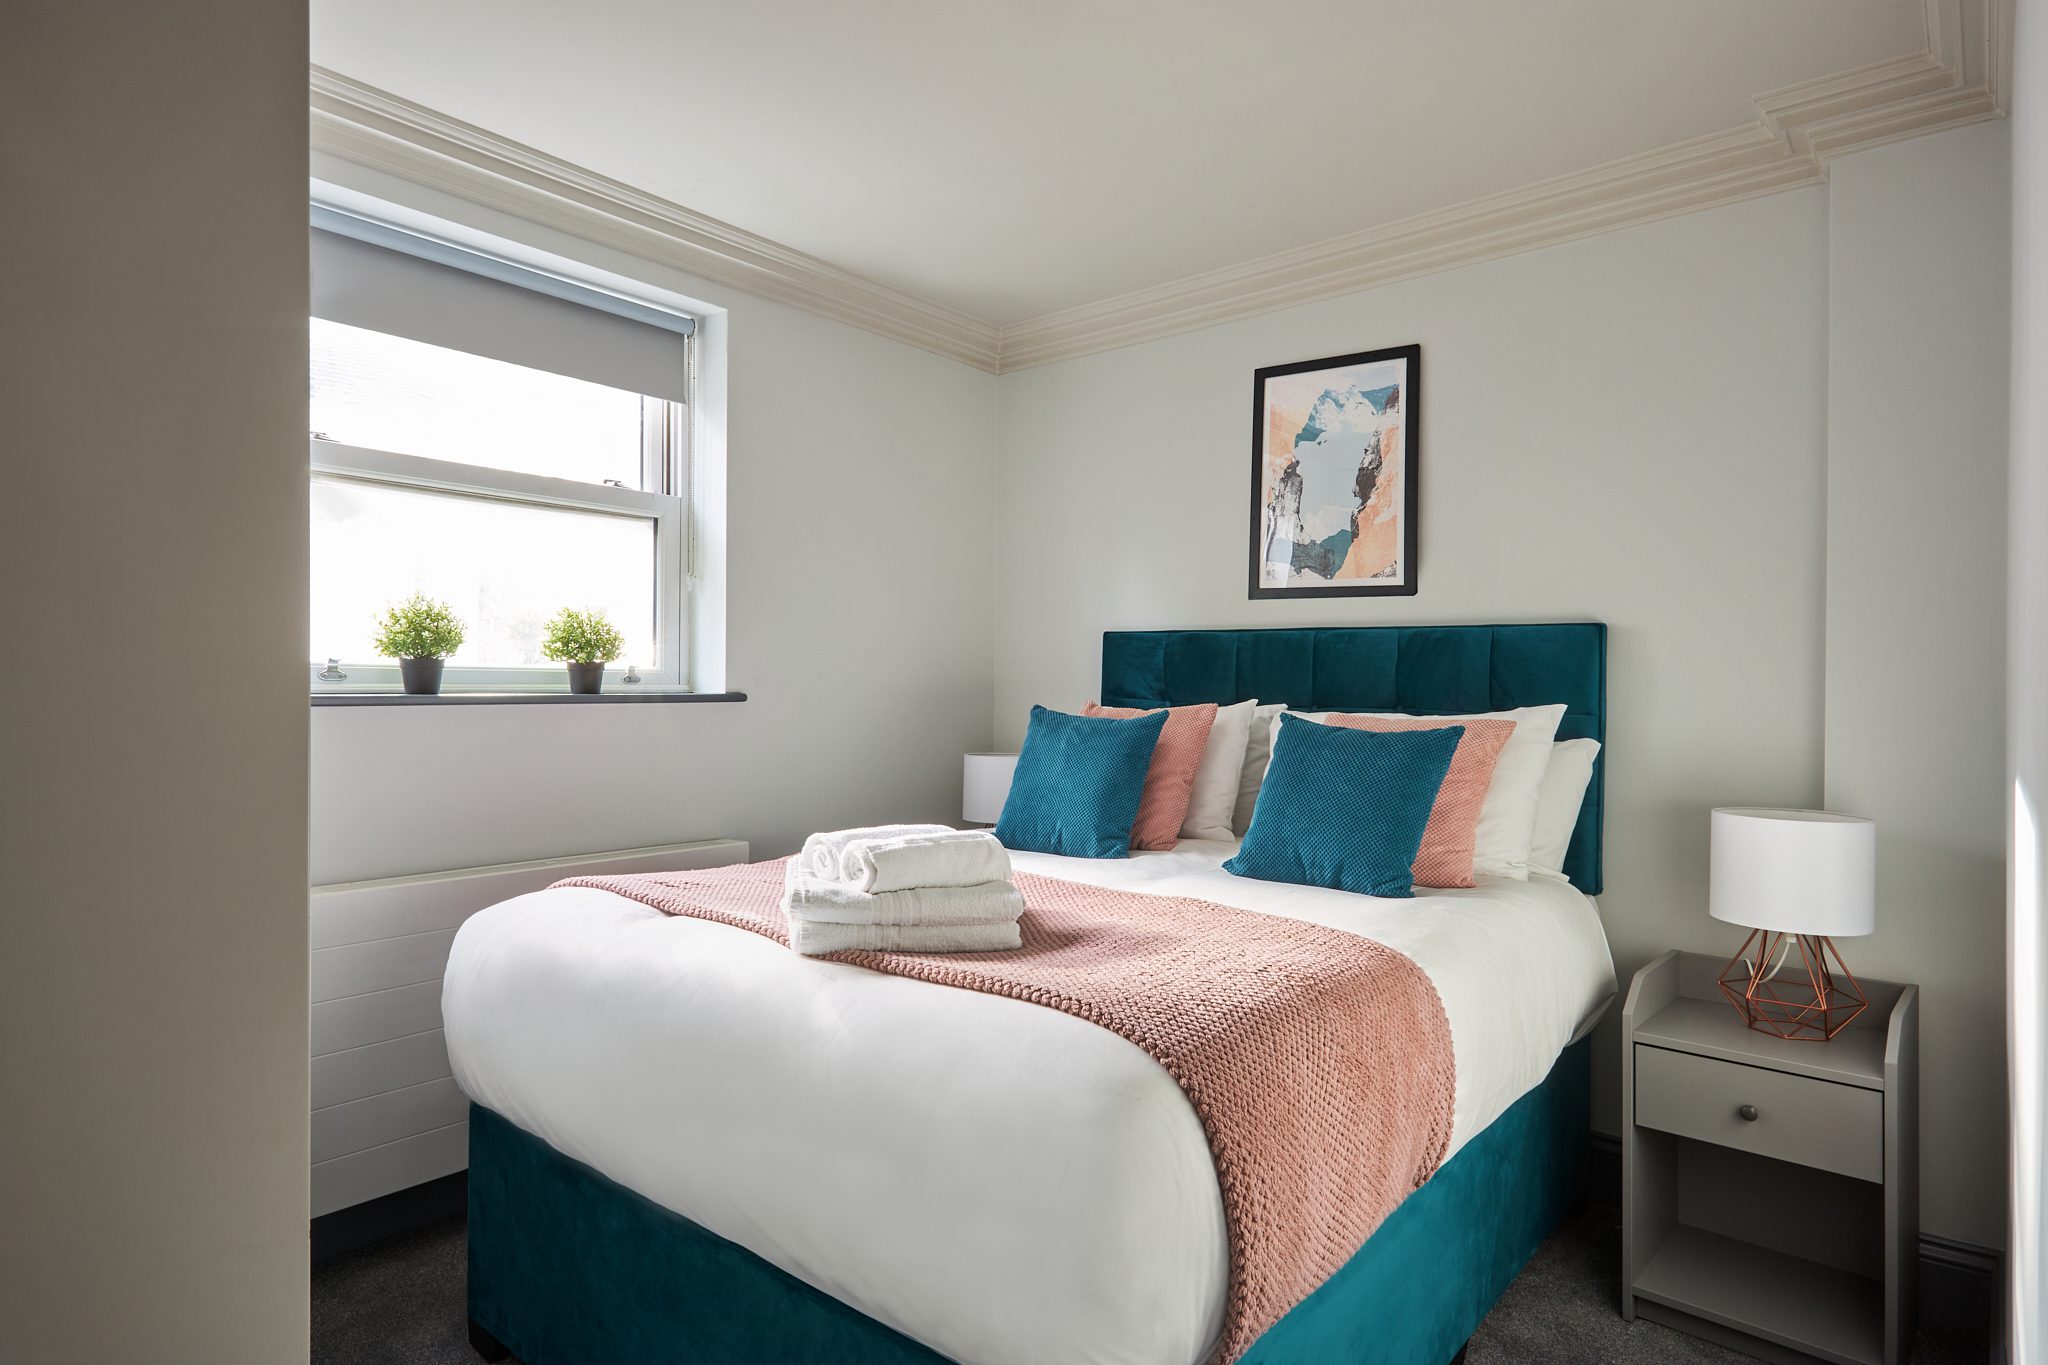 Earls Court a Corporate Apartments in Kensington is a traditional Victorian building.Ideal for business or leisure, with fully-fitted kitchen. Book Now +44 (0) 208 691 3920